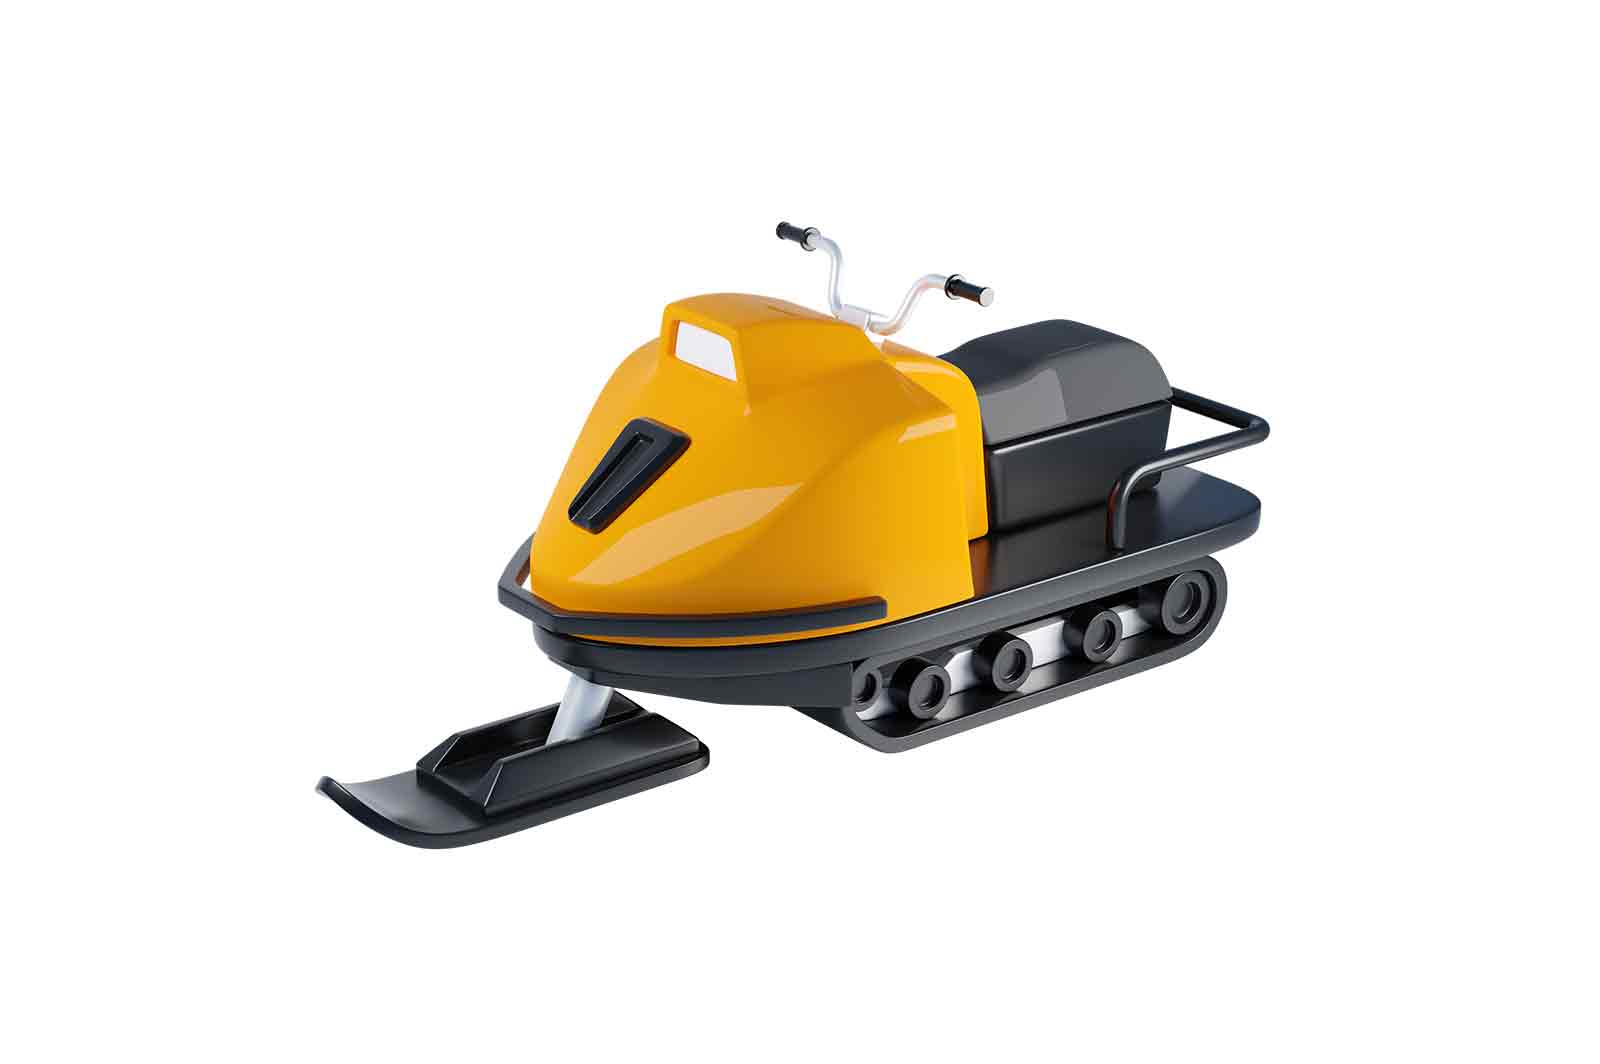 Snowmobile or snow scooter 3d rendered illustration. Ski-doo, snowmachine, motorized vehicle for winter travel and recreation on snow